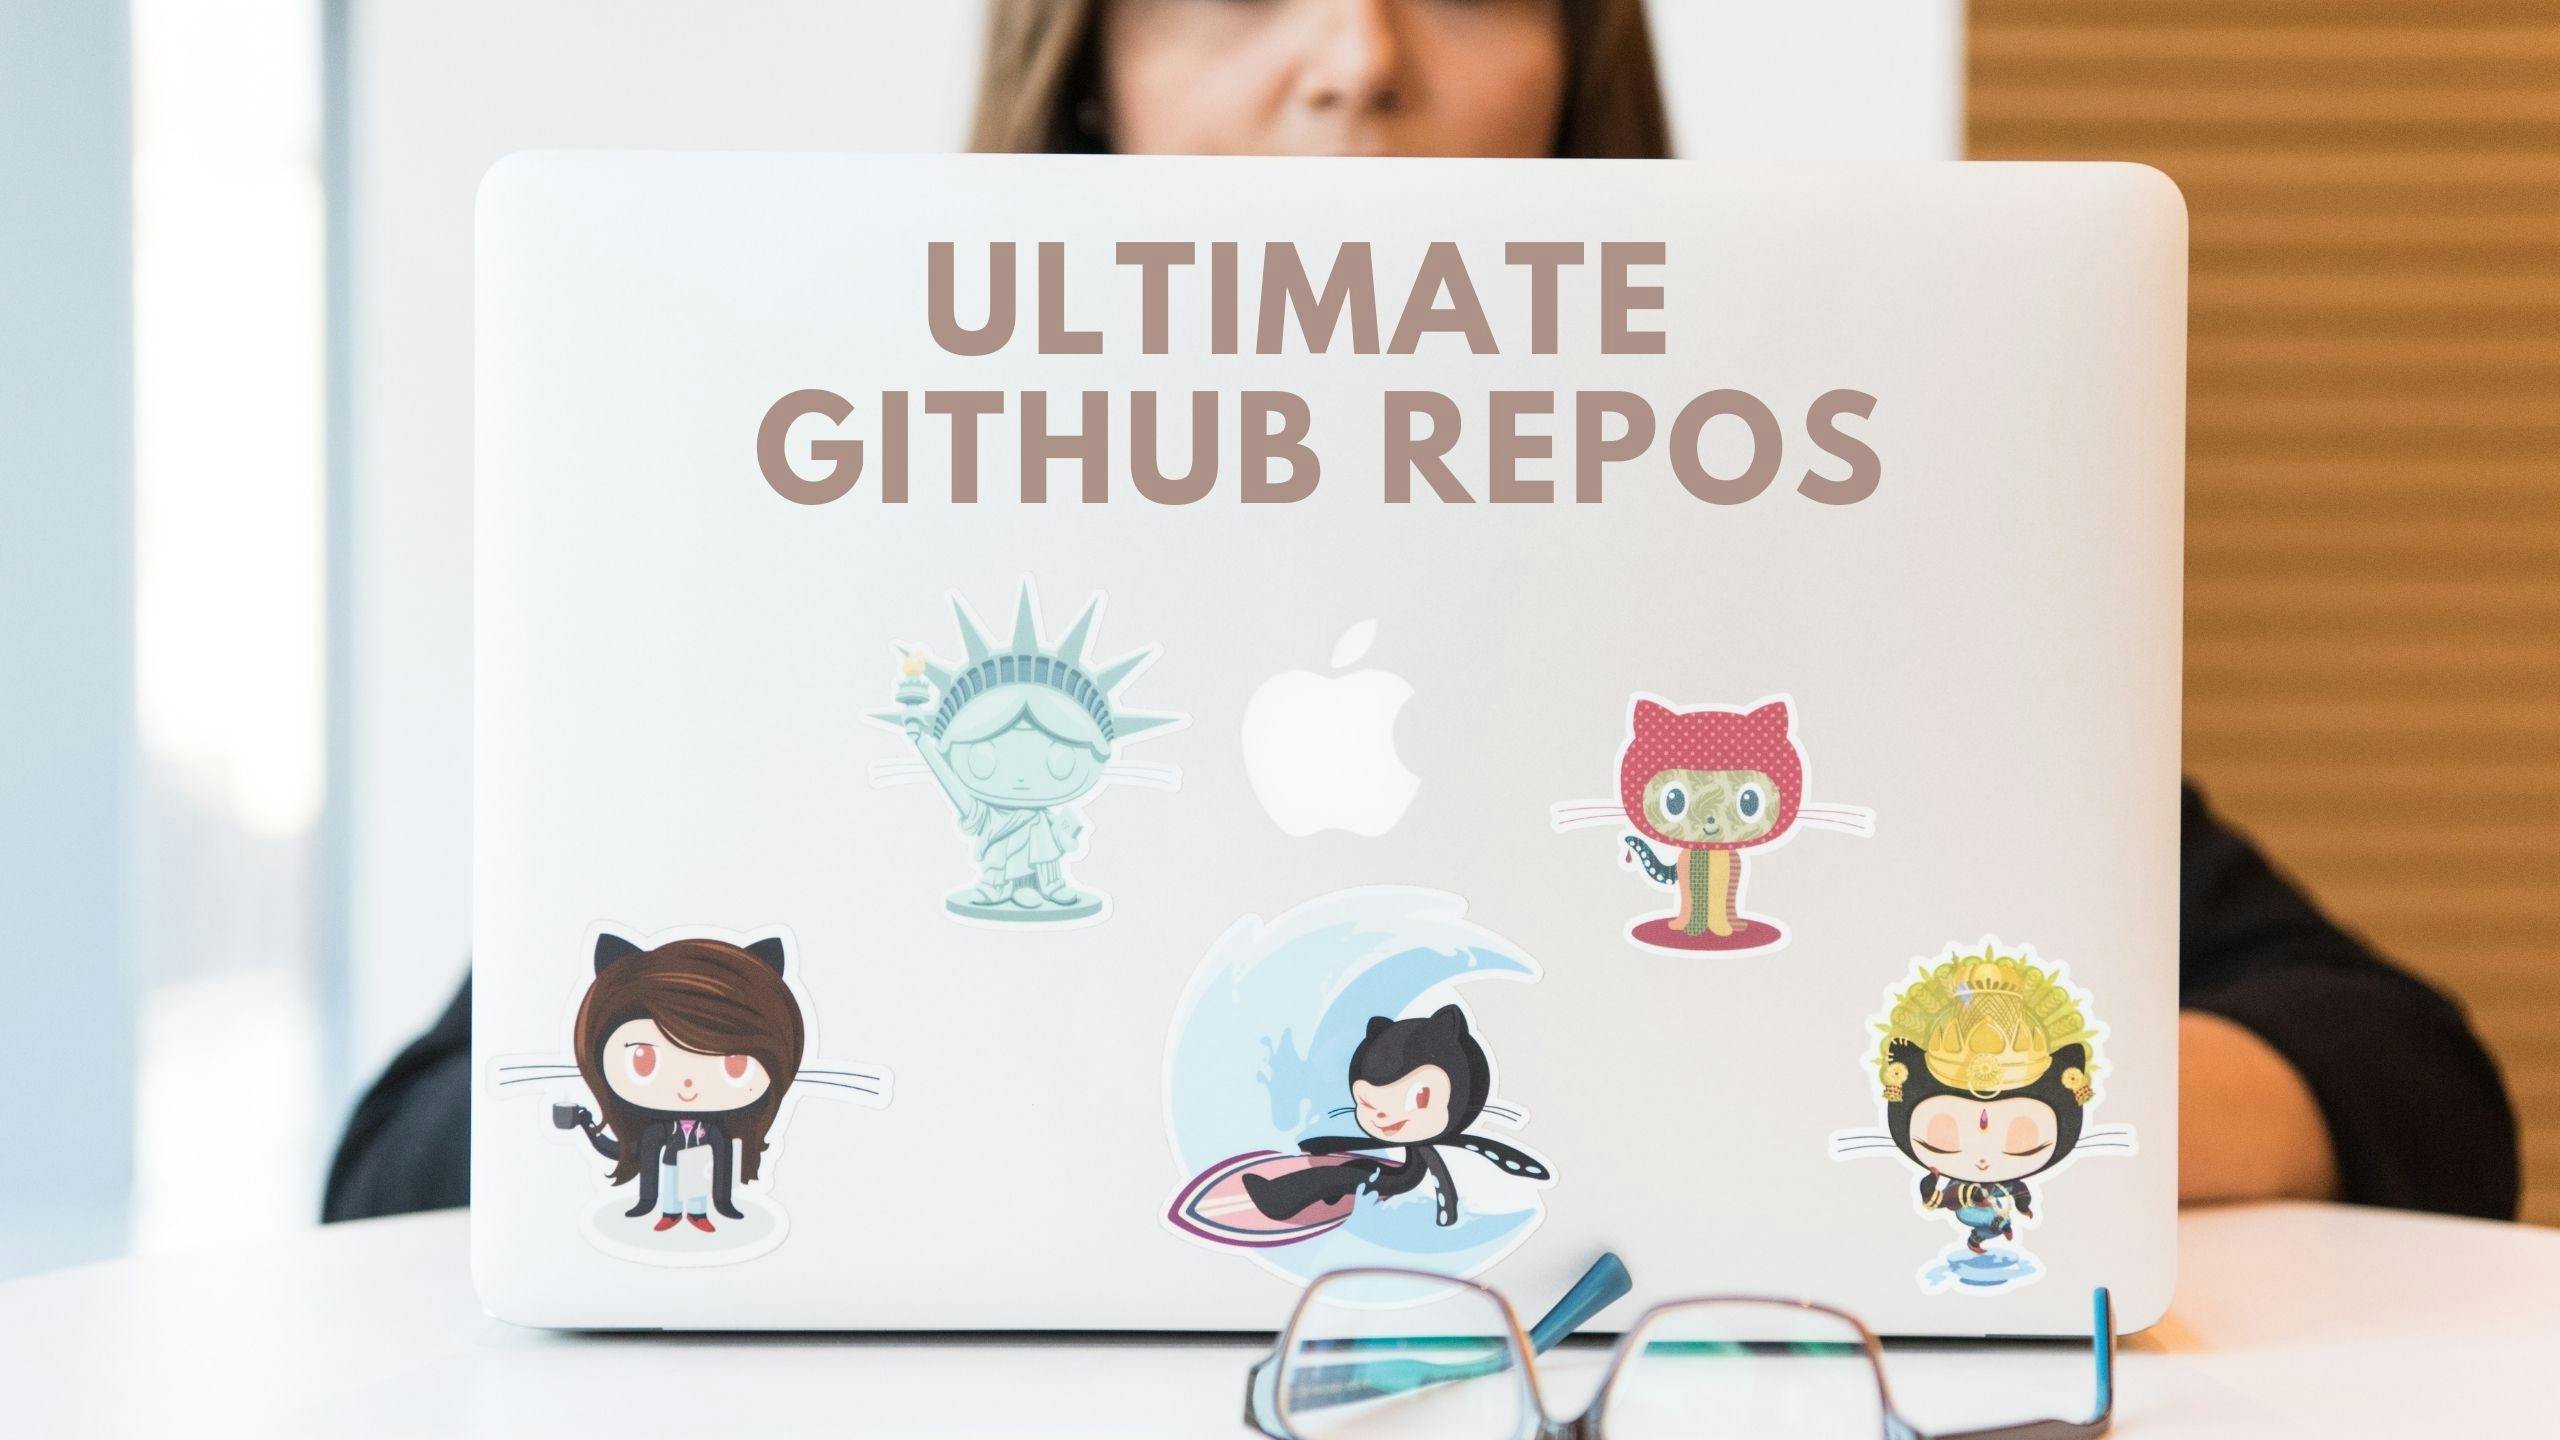 7 GitHub Repository every Software Engineer should Know